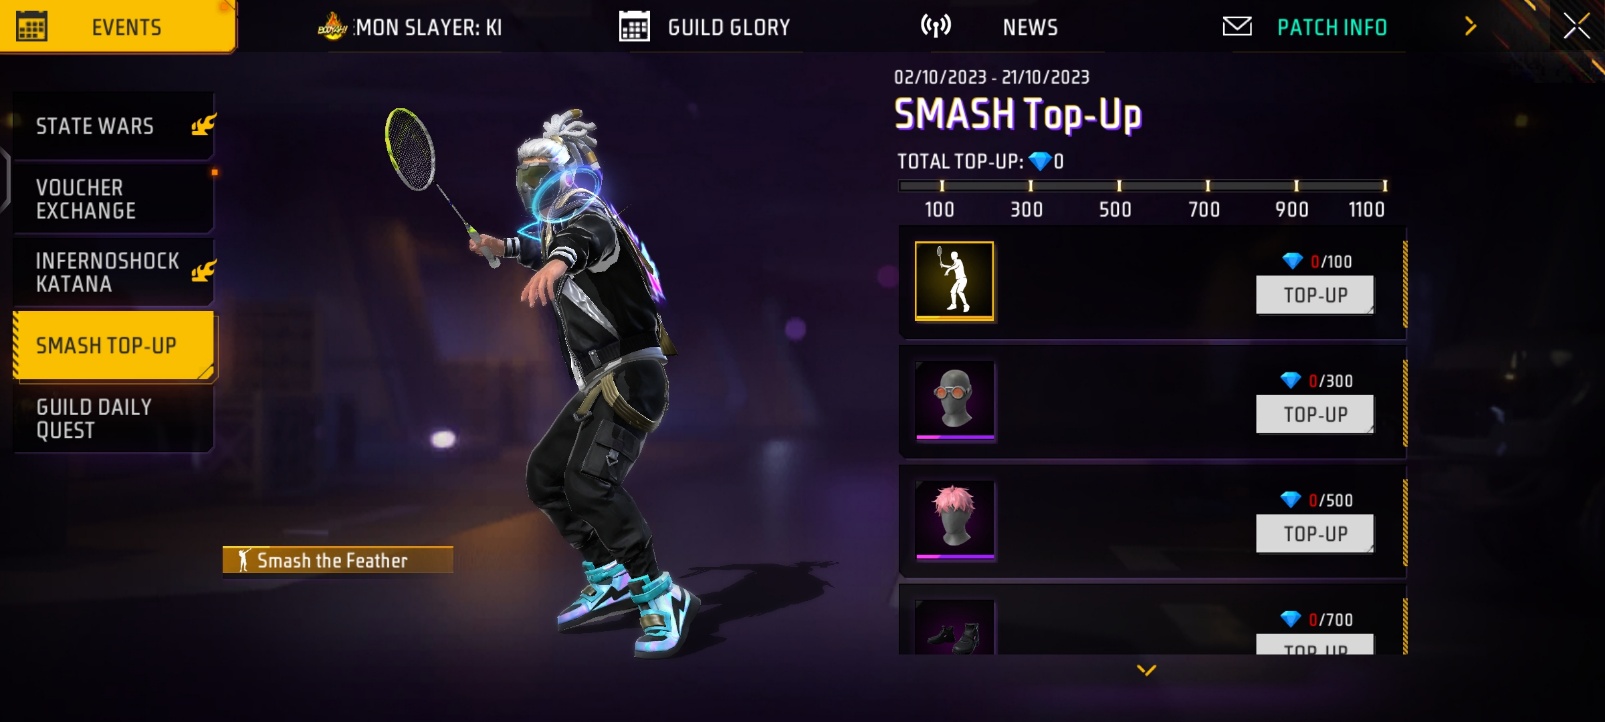 New Top-Up Event in Free Fire Max: Smash Top-Up